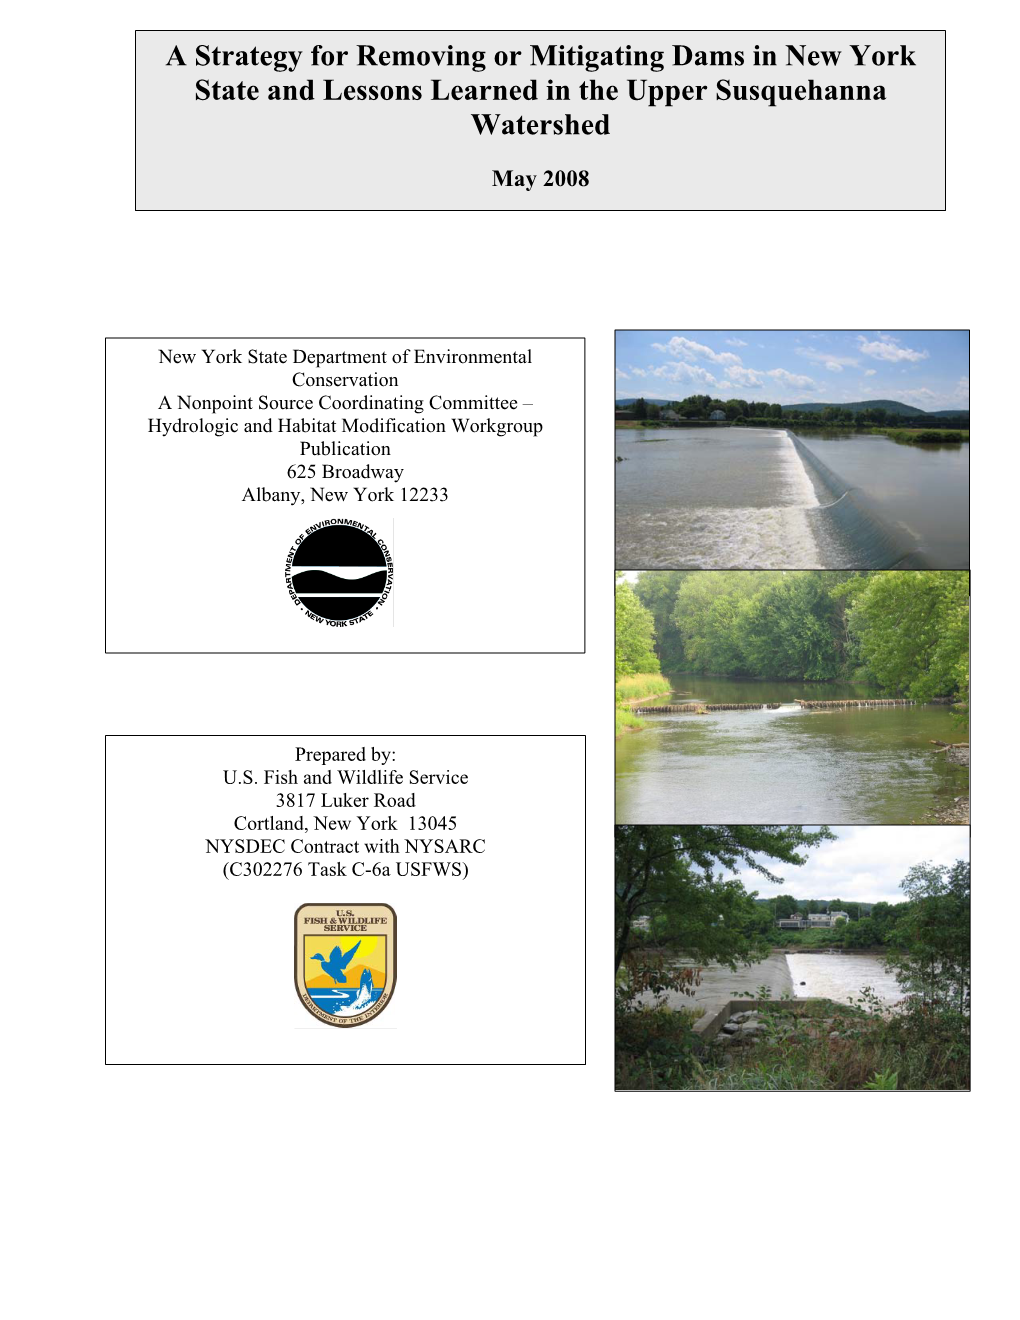 A Strategy for Removing Or Mitigating Dams in New York State and Lessons Learned in the Upper Susquehanna Watershed